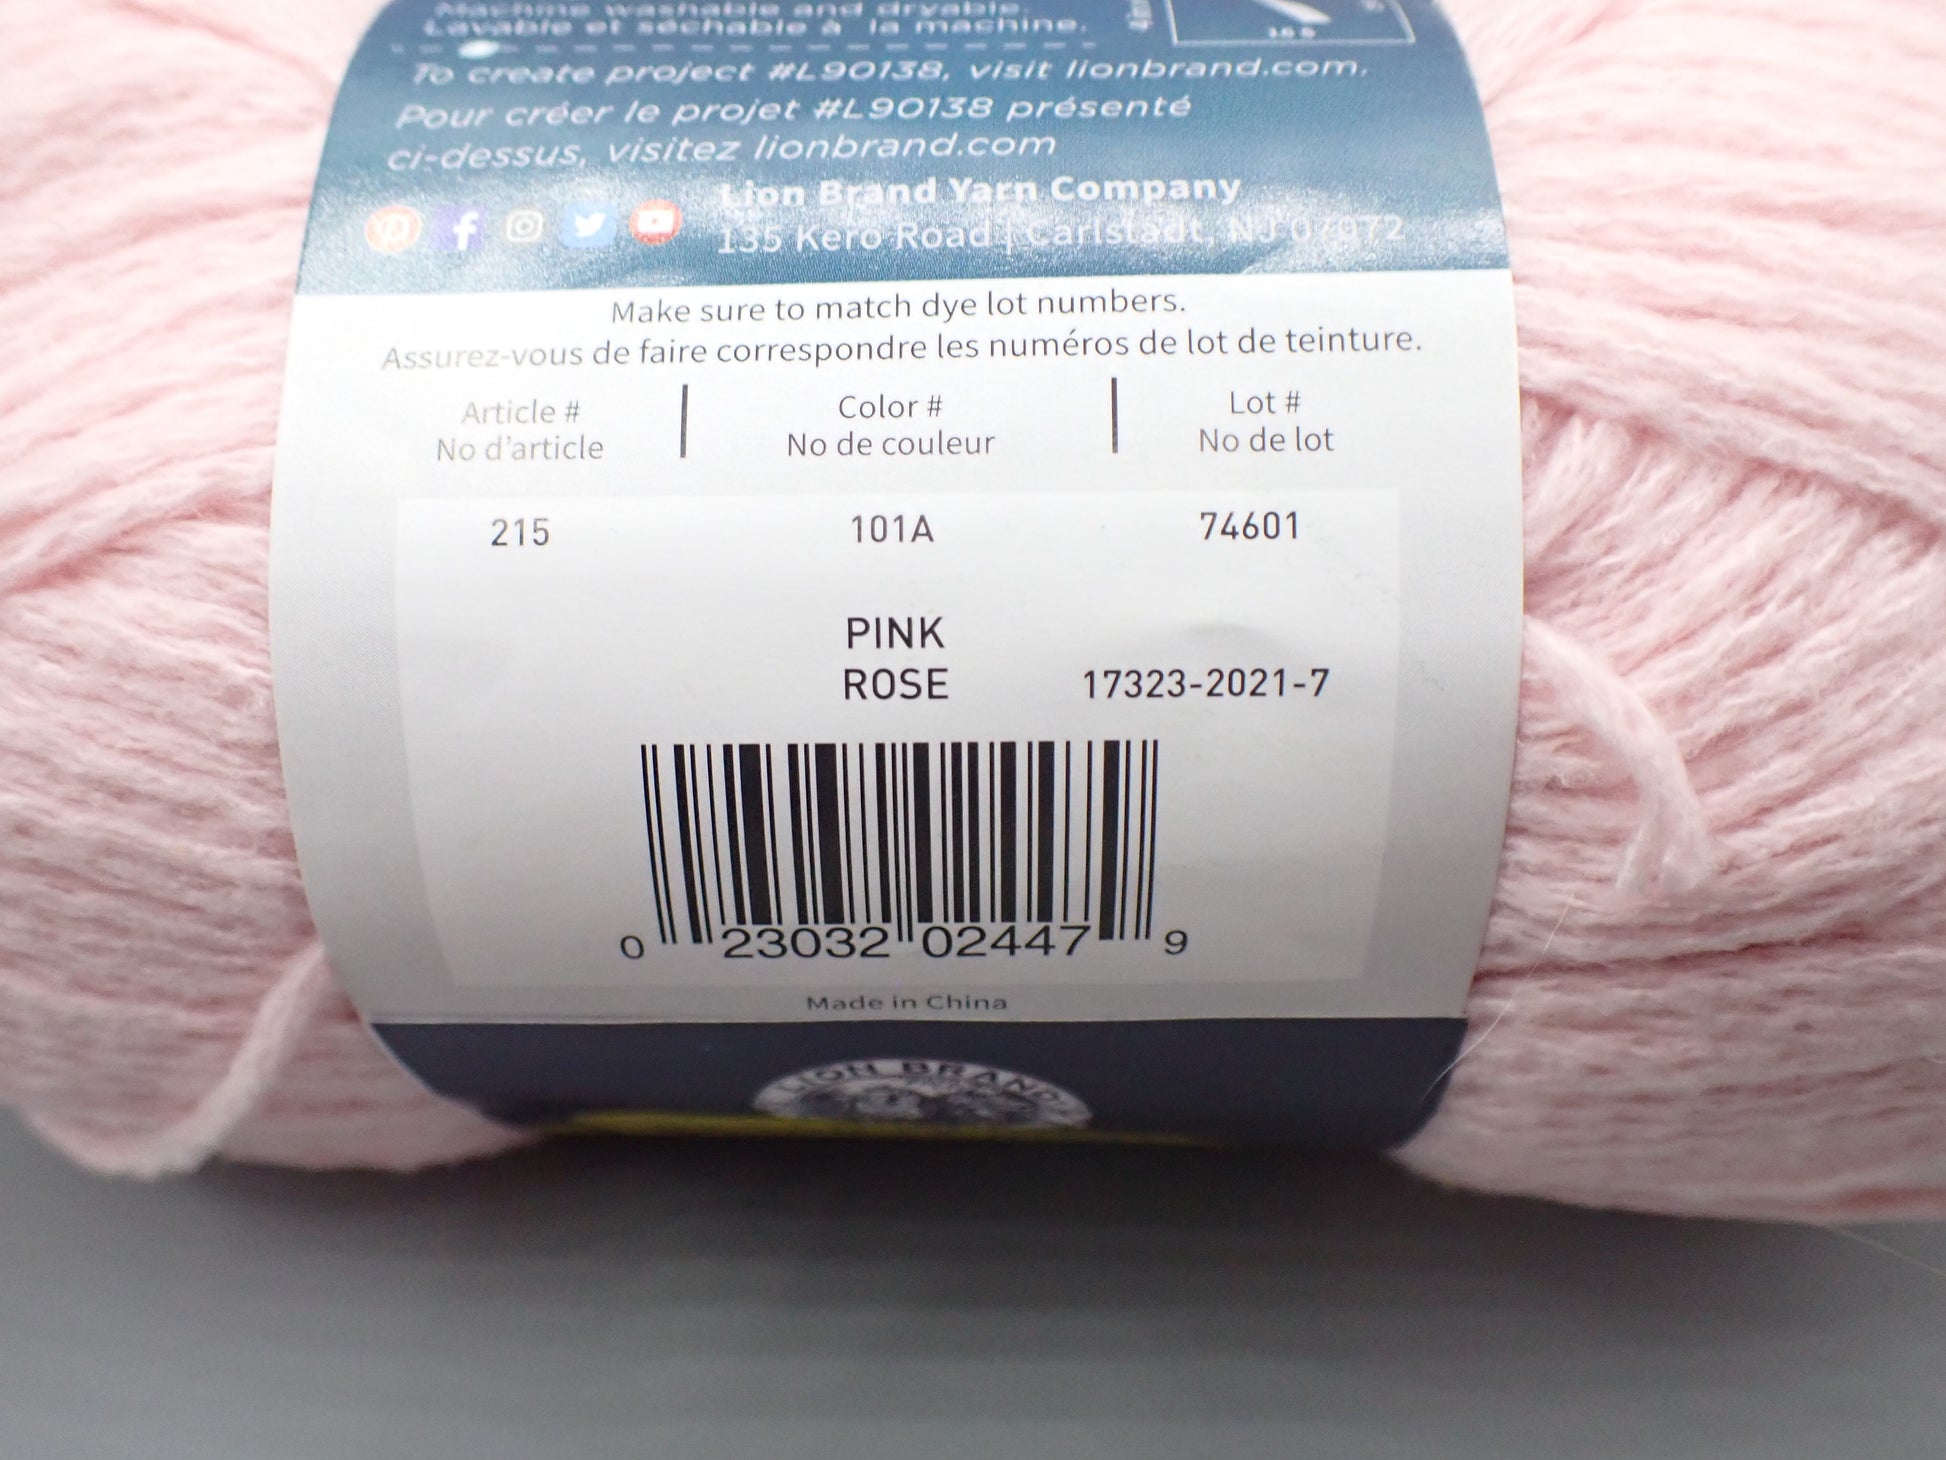 Lion Brand Yarns Worsted weight Feels Like Butta Pale Grey – Sweetwater  Yarns